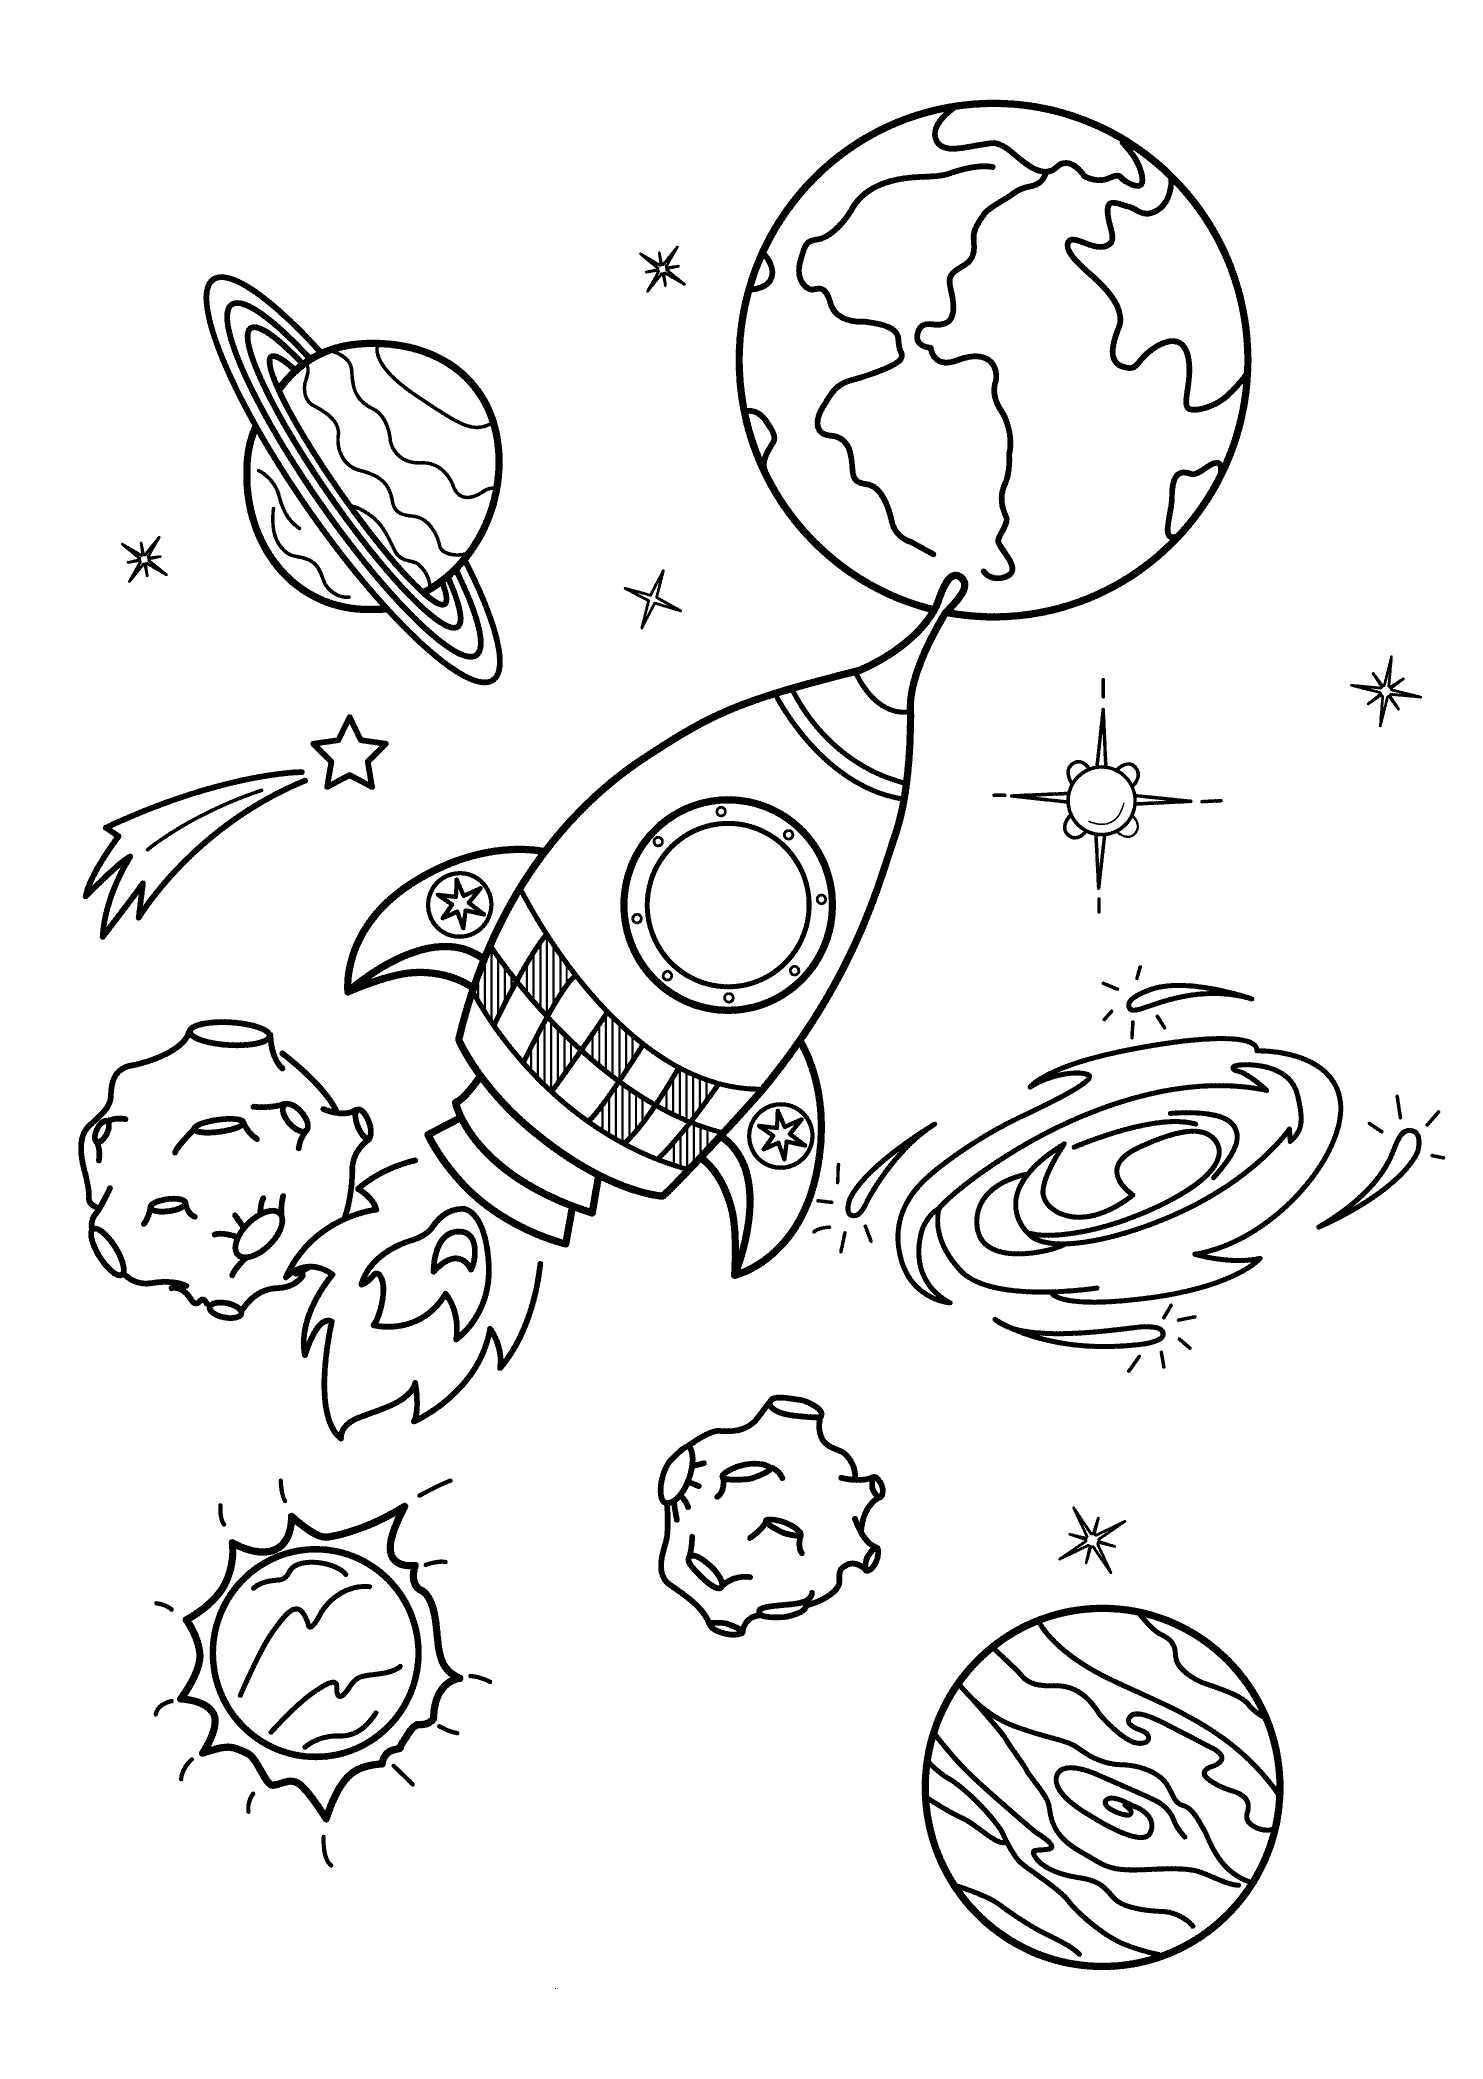 Rocket and Planets in our Galaxy